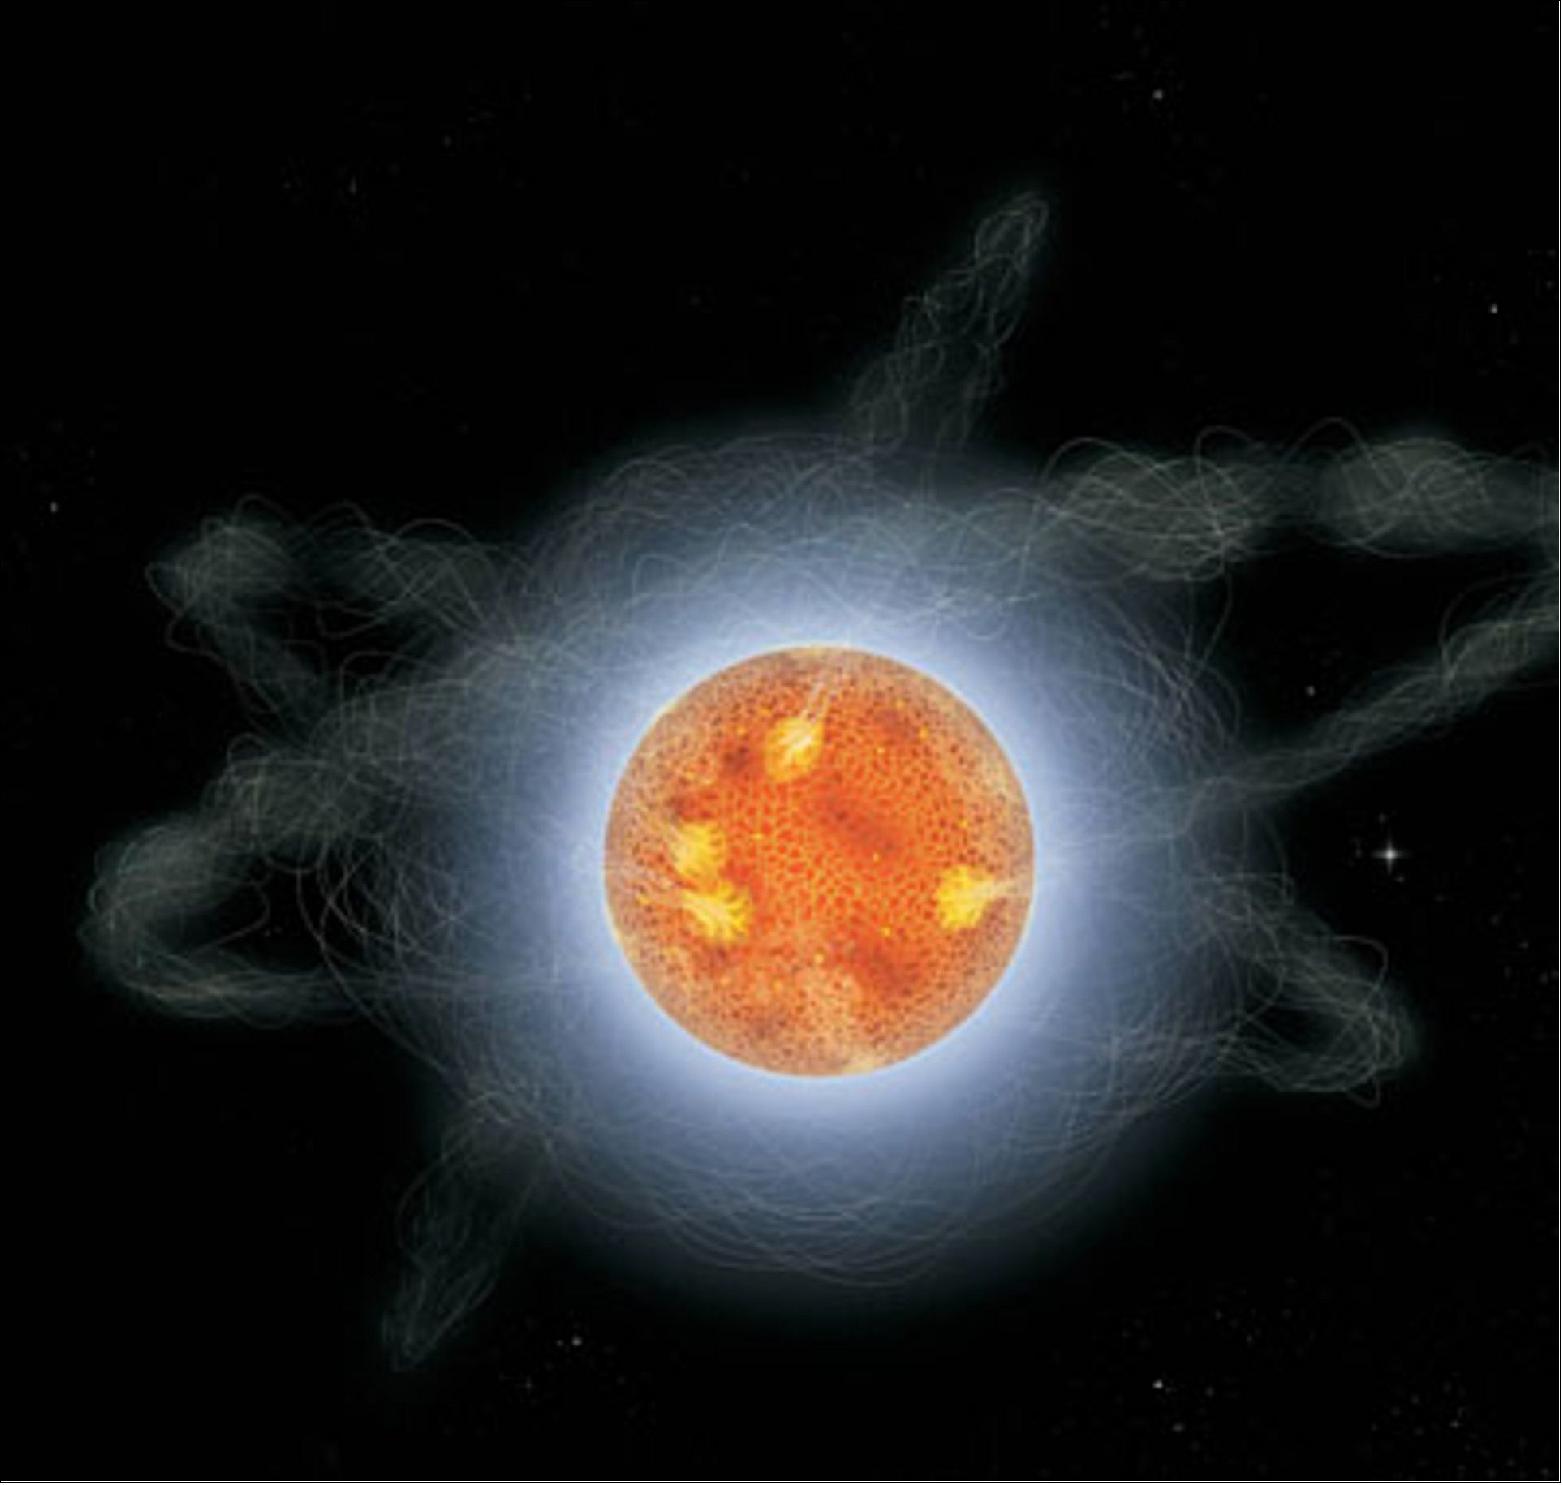 Figure 37: Artist’s impression of a magnetar. X-ray and gamma-ray data from ESA’s XMM-Newton and INTEGRAL orbiting observatories has been used to test, for the first time, the physical processes thought to lie behind the emission of magnetars, an atypical class of neutron stars with ultra-strong magnetic fields (image credit: © 2008 Sky & Telescope: Gregg Dinderman)